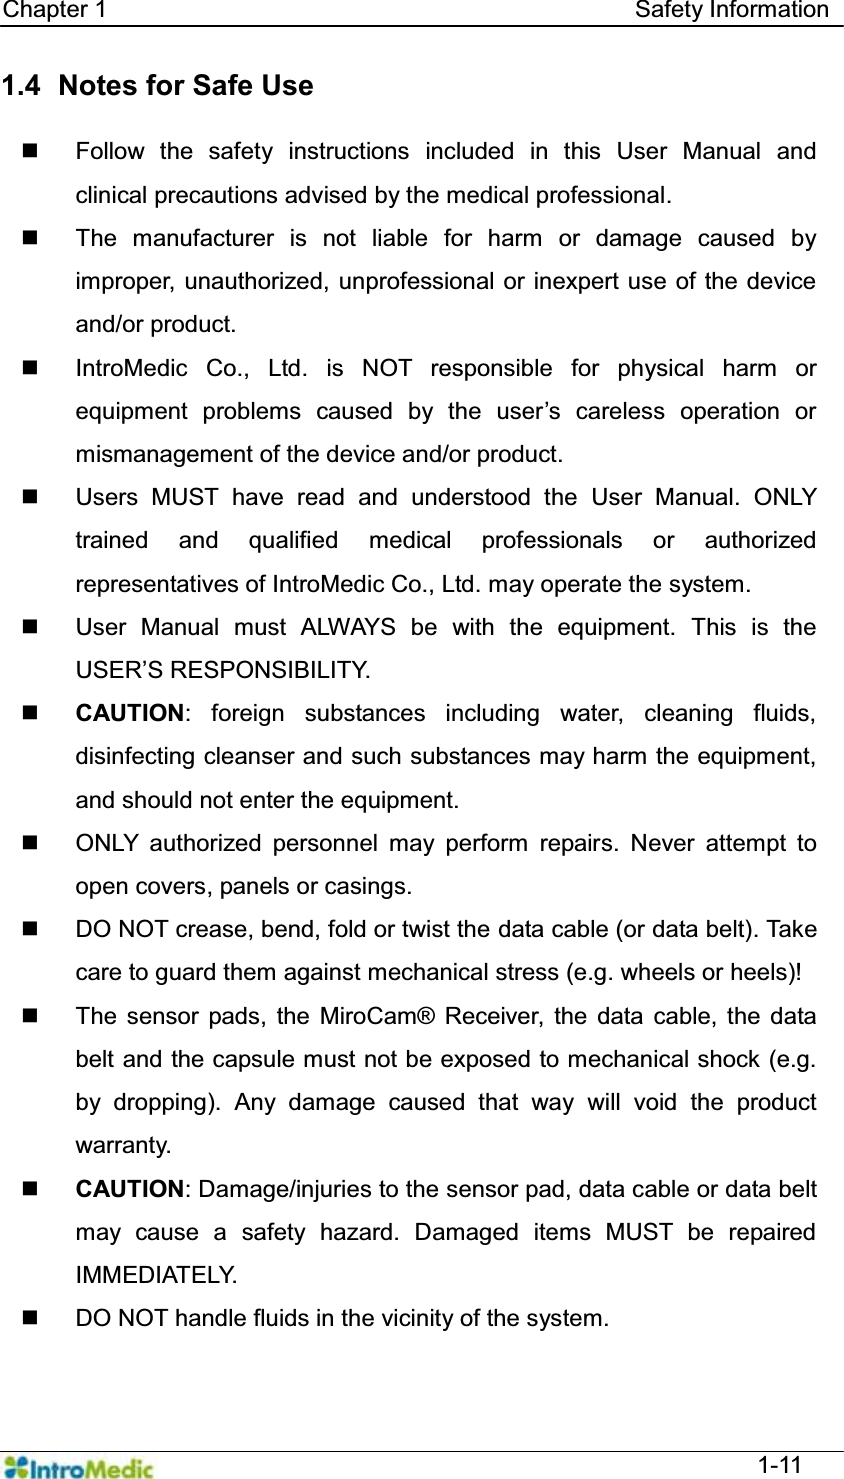   Chapter 1                                            Safety Information  1-11 1.4   Notes for Safe Use      Follow the safety instructions included in this User Manual and clinical precautions advised by the medical professional.     The manufacturer is not liable for harm or damage caused by improper, unauthorized, unprofessional or inexpert use of the device and/or product.   IntroMedic Co., Ltd. is NOT responsible for physical harm or HTXLSPHQW SUREOHPV FDXVHG E\ WKH XVHU¶V FDUHOHVV RSHUDWLRQ RUmismanagement of the device and/or product.   Users MUST have read and understood the User Manual. ONLY trained and qualified medical professionals or authorized representatives of IntroMedic Co., Ltd. may operate the system.   User Manual must ALWAYS be with the equipment. This is the 86(5¶65(63216,%,/,7&lt;.  CAUTION: foreign substances including water, cleaning fluids, disinfecting cleanser and such substances may harm the equipment, and should not enter the equipment.     ONLY authorized personnel may perform repairs. Never attempt to open covers, panels or casings.   DO NOT crease, bend, fold or twist the data cable (or data belt). Take care to guard them against mechanical stress (e.g. wheels or heels)!     The sensor pads, the MiroCam® Receiver, the data cable, the data belt and the capsule must not be exposed to mechanical shock (e.g. by dropping). Any damage caused that way will void the product warranty.  CAUTION: Damage/injuries to the sensor pad, data cable or data belt may cause a safety hazard. Damaged items MUST be repaired IMMEDIATELY.   DO NOT handle fluids in the vicinity of the system. 